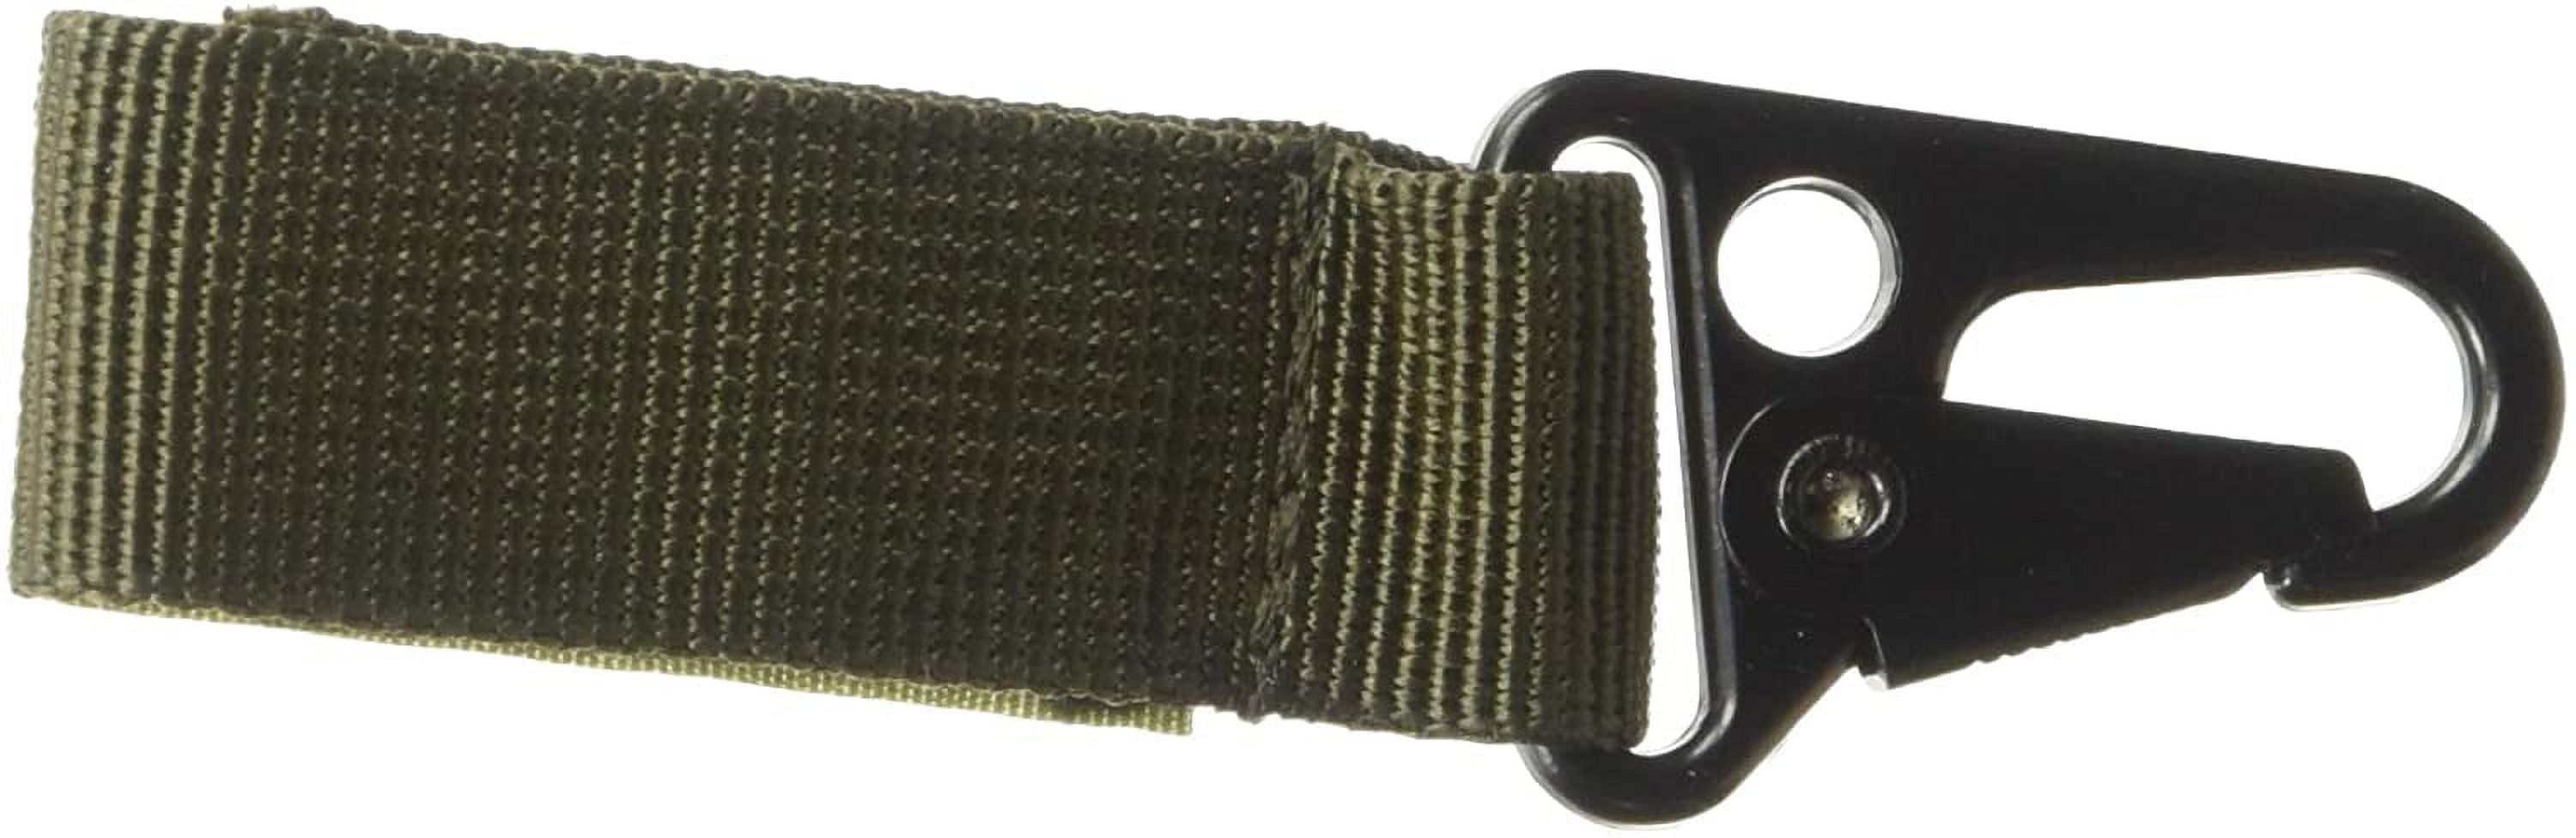 Embroidered Blood Type TAgs with Velcro and Metal Clip OD Green - image 2 of 2